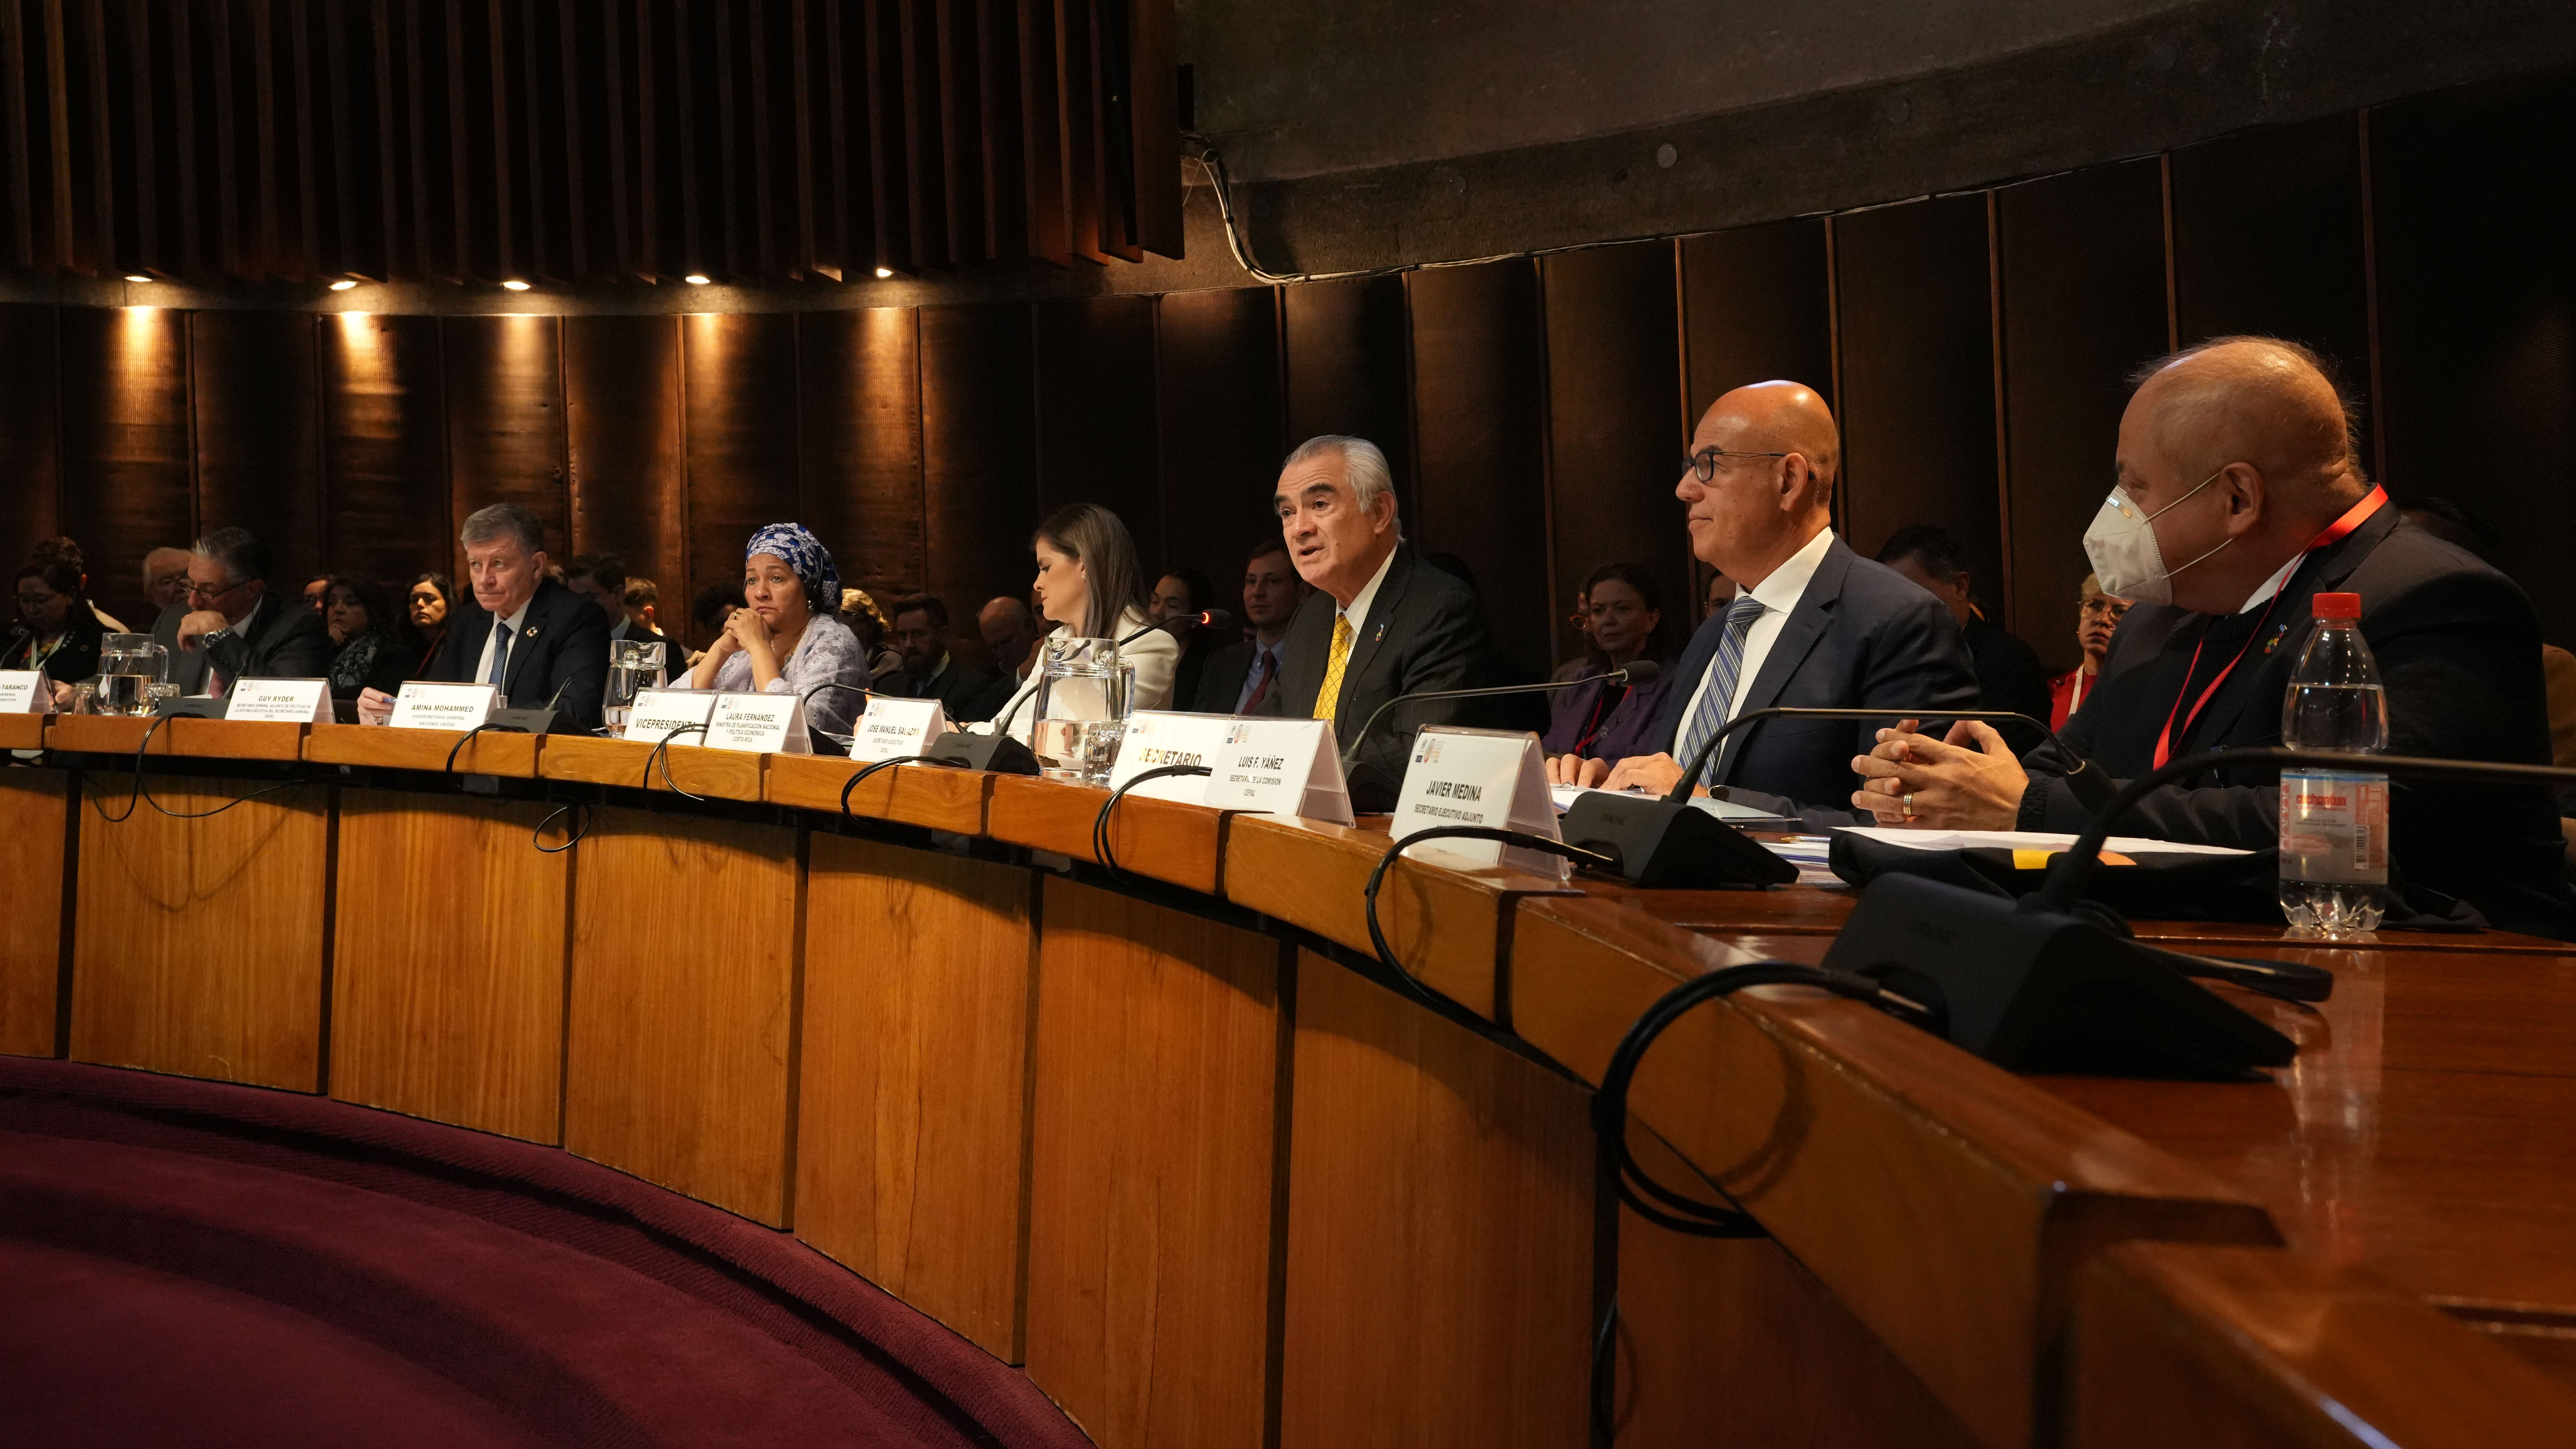 Panel of the opening session meeting.